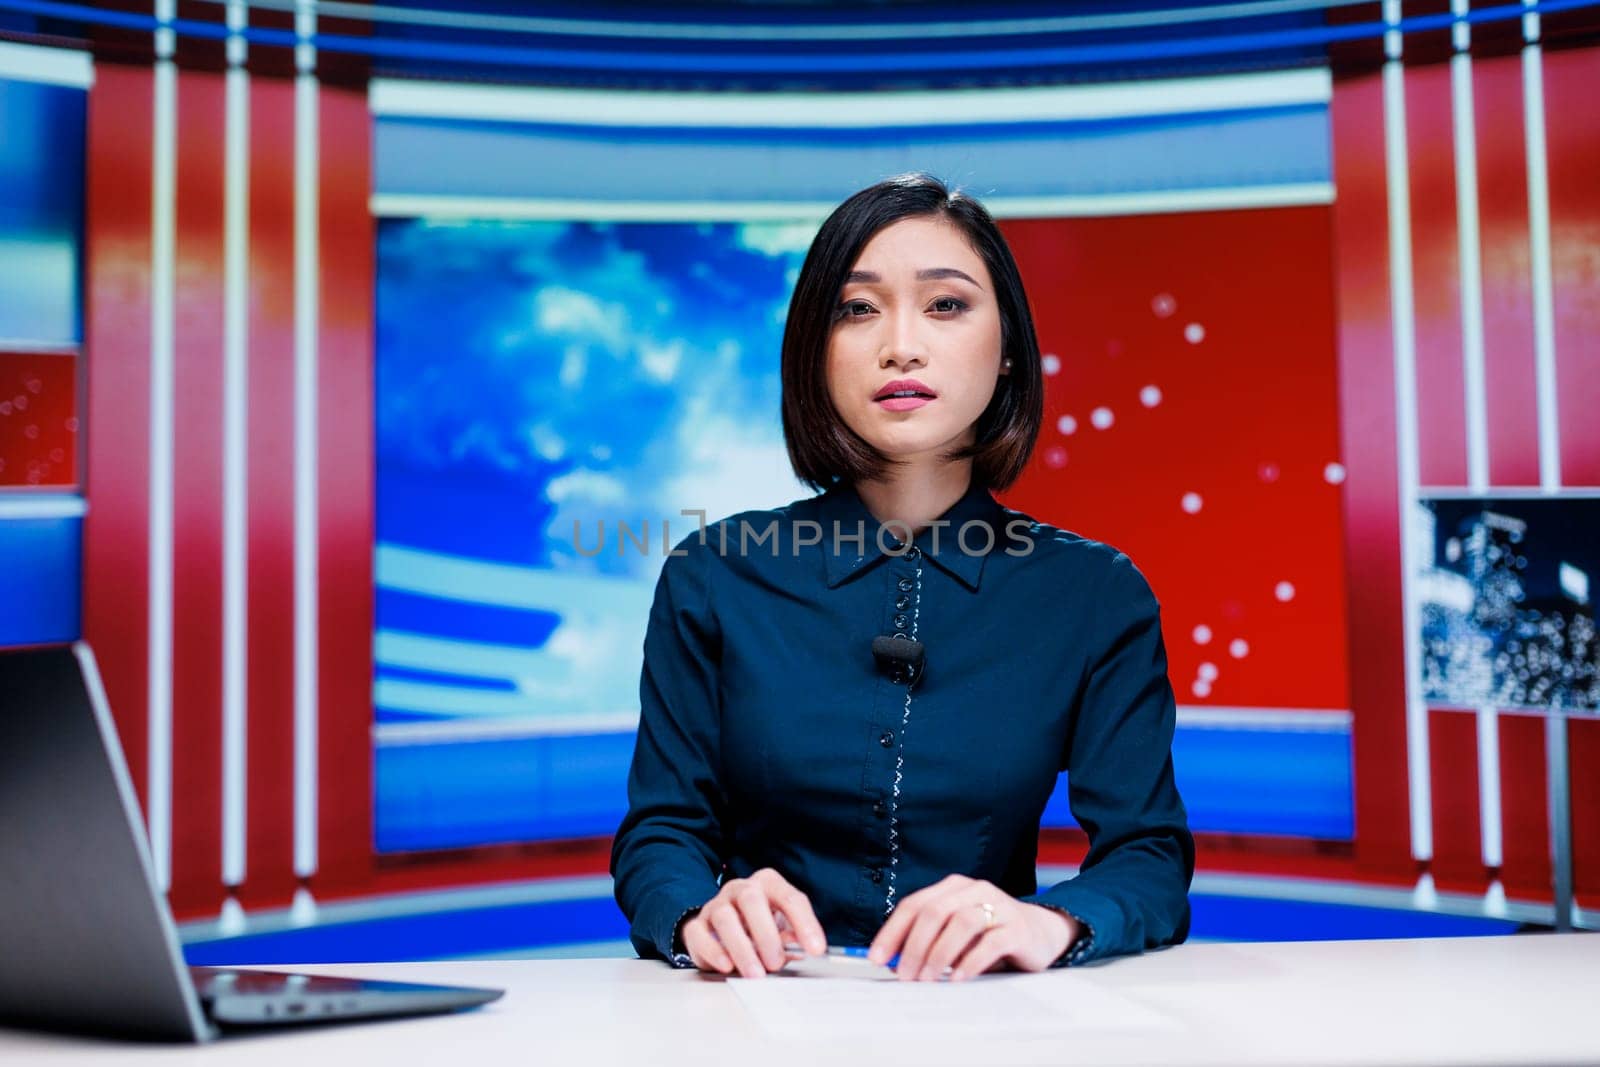 News anchor talking about politics on live broadcast show, presenting daily events and entertainment reportage. Asian newscaster covering all important stories, television network.